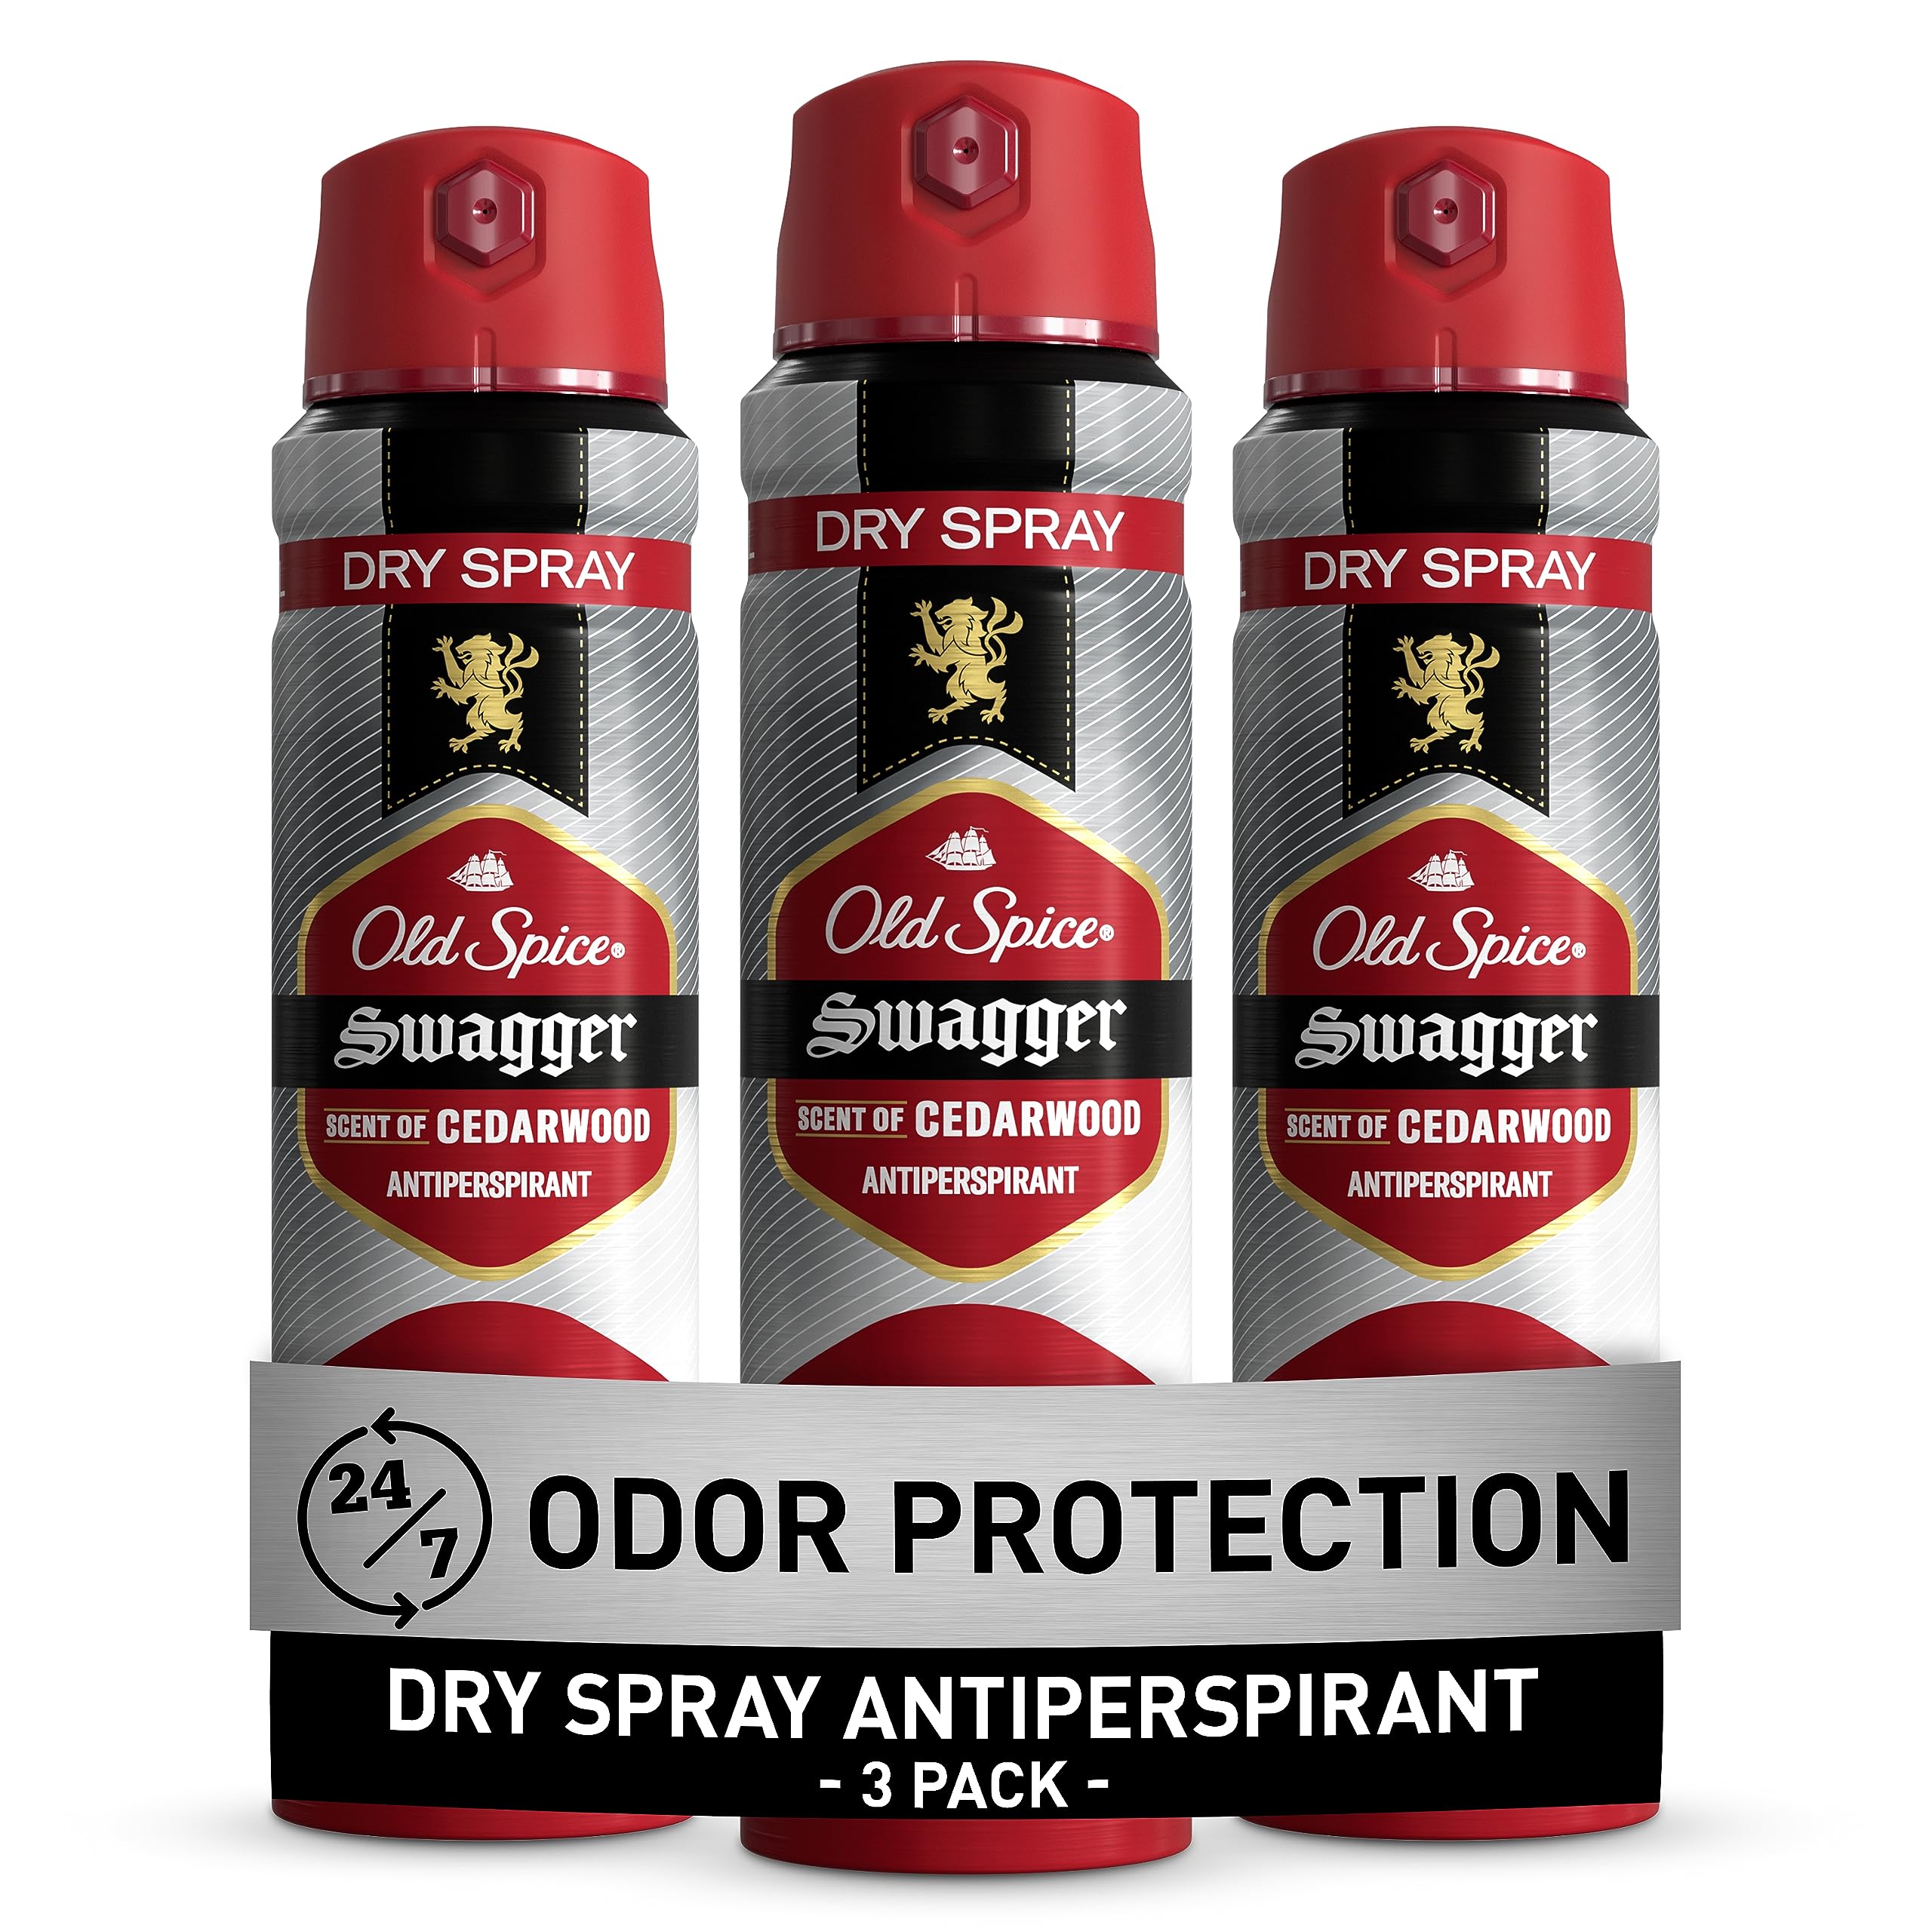 Old Spice Antiperspirant and Deodorant for Men, Invisible Dry Spray, Stronger Swagger Scent, 4.3 Oz, Pack of 3